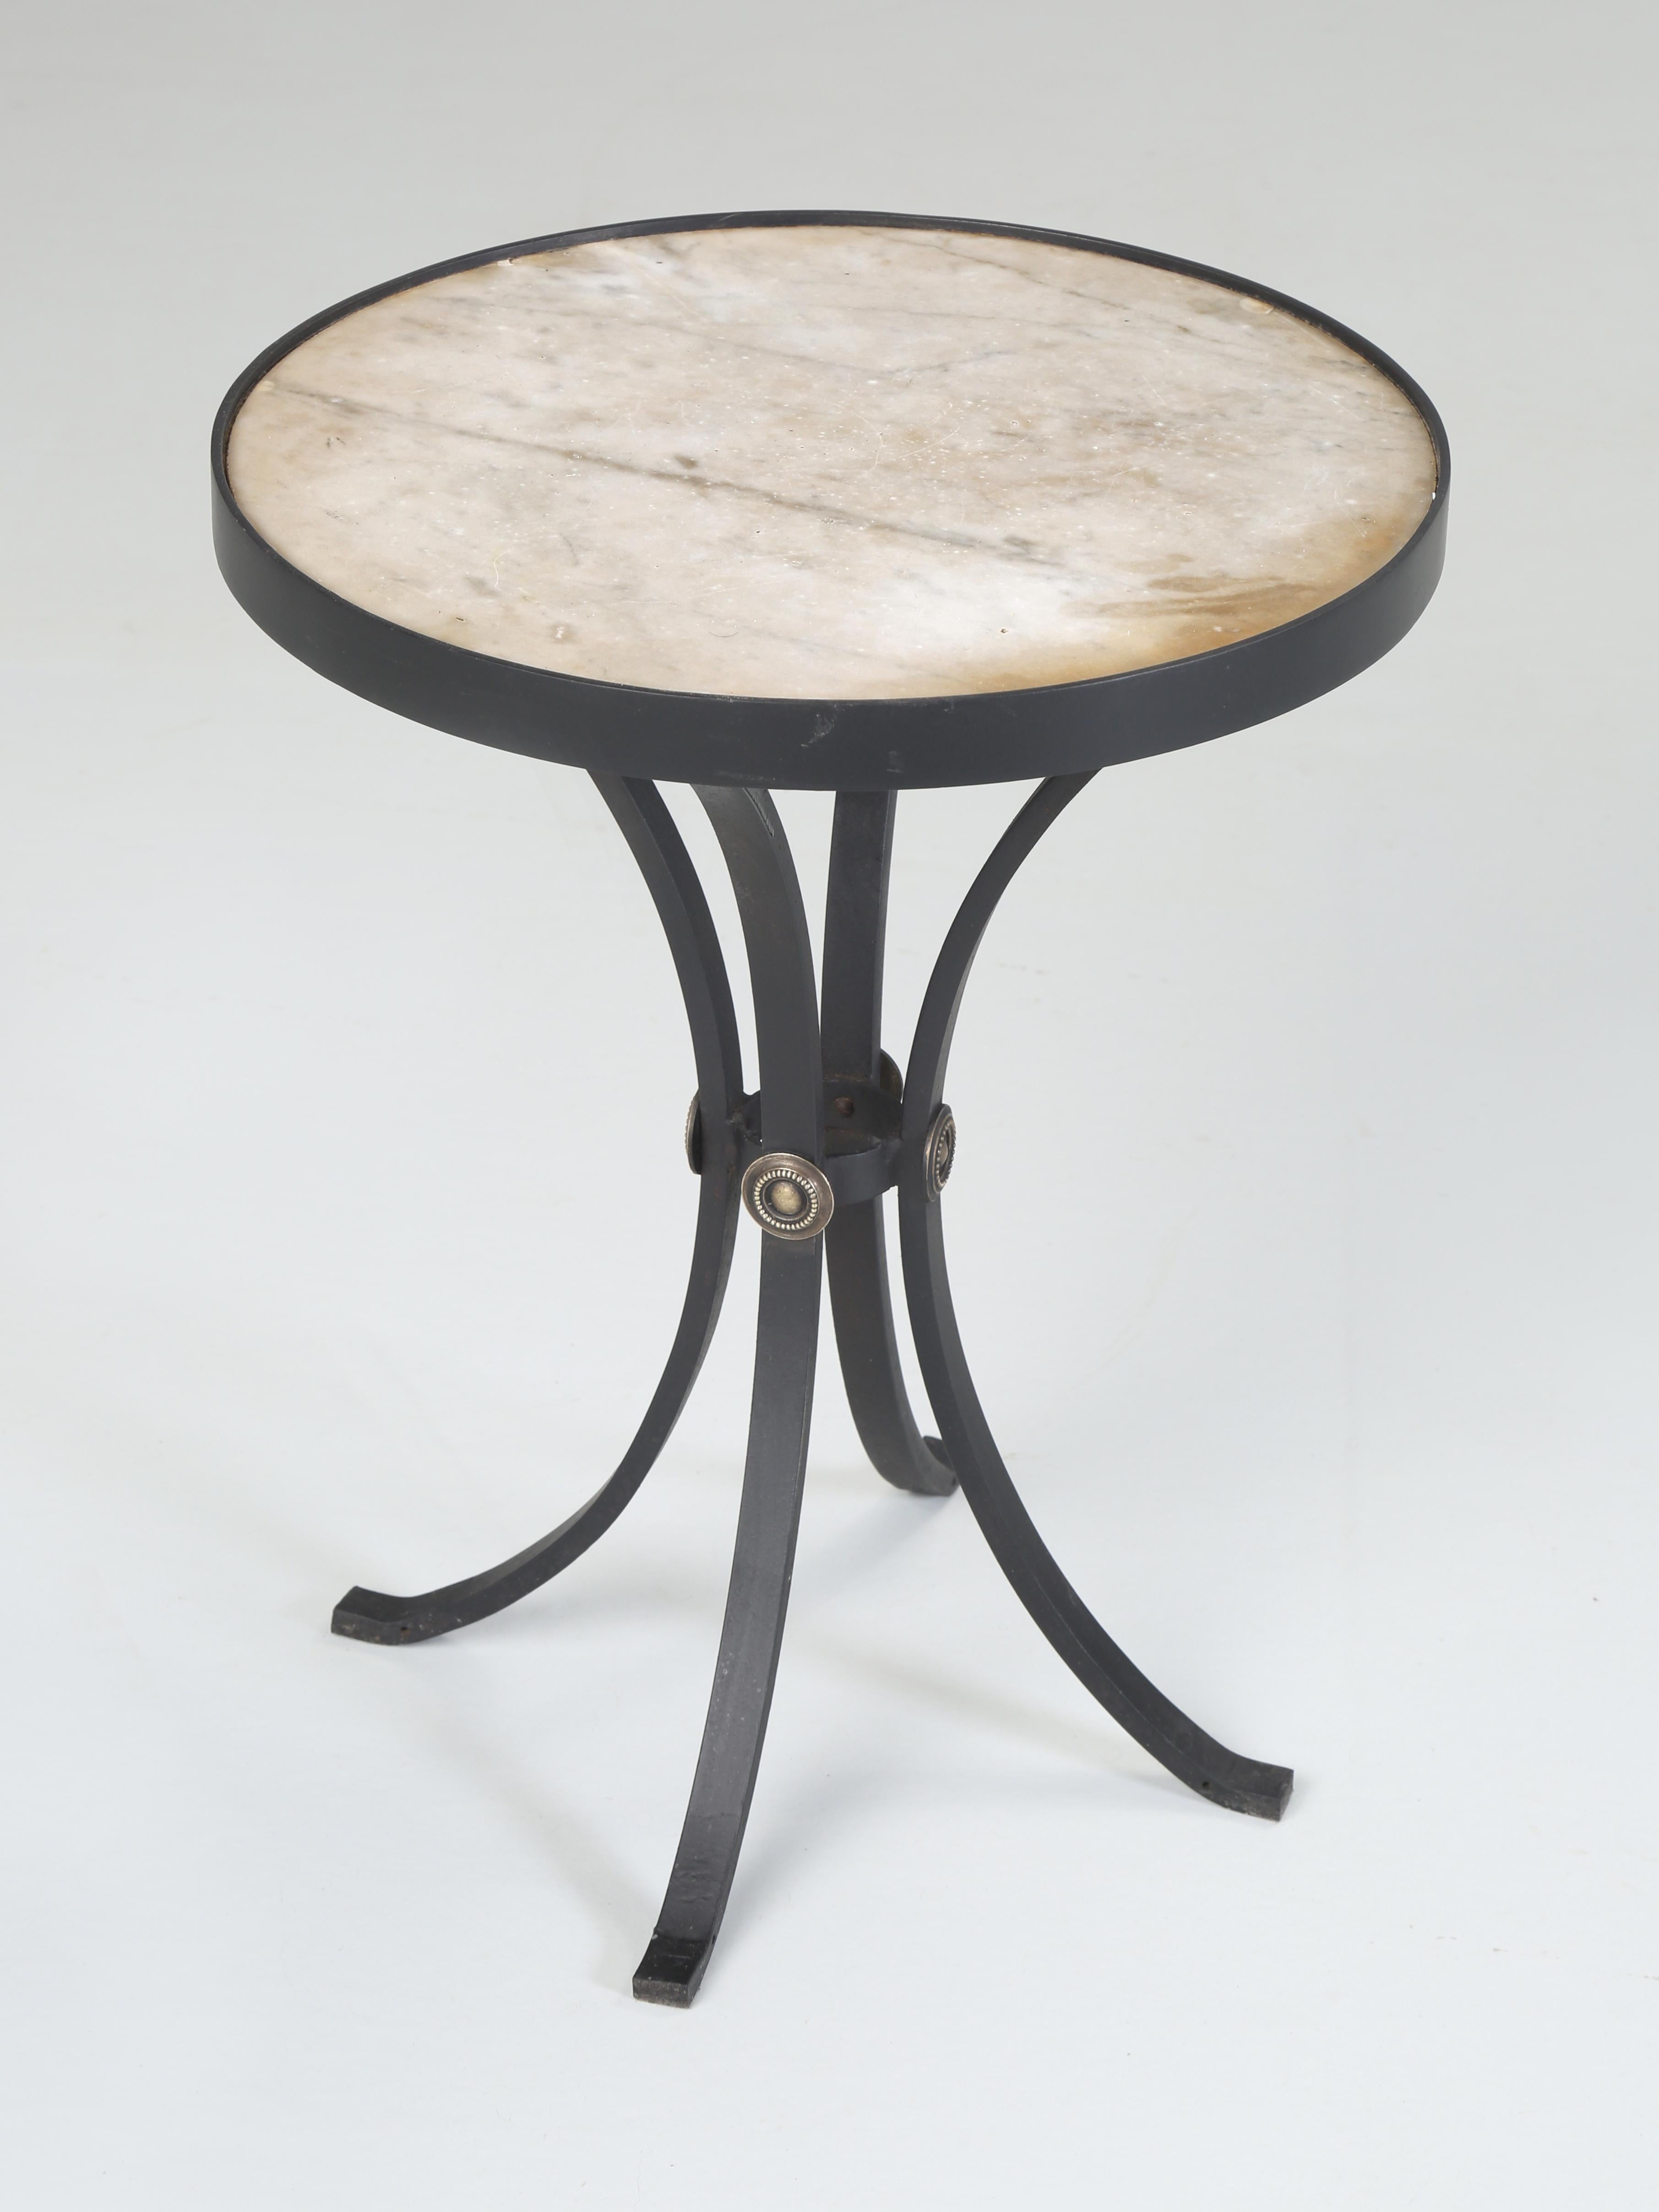 Vintage French Small Round Bistro Style End Table, Side Table or even a small Coffee Table. This small round marble and steel table came from Toulouse, France and could have been used in a commercial application and I base that assumption on the